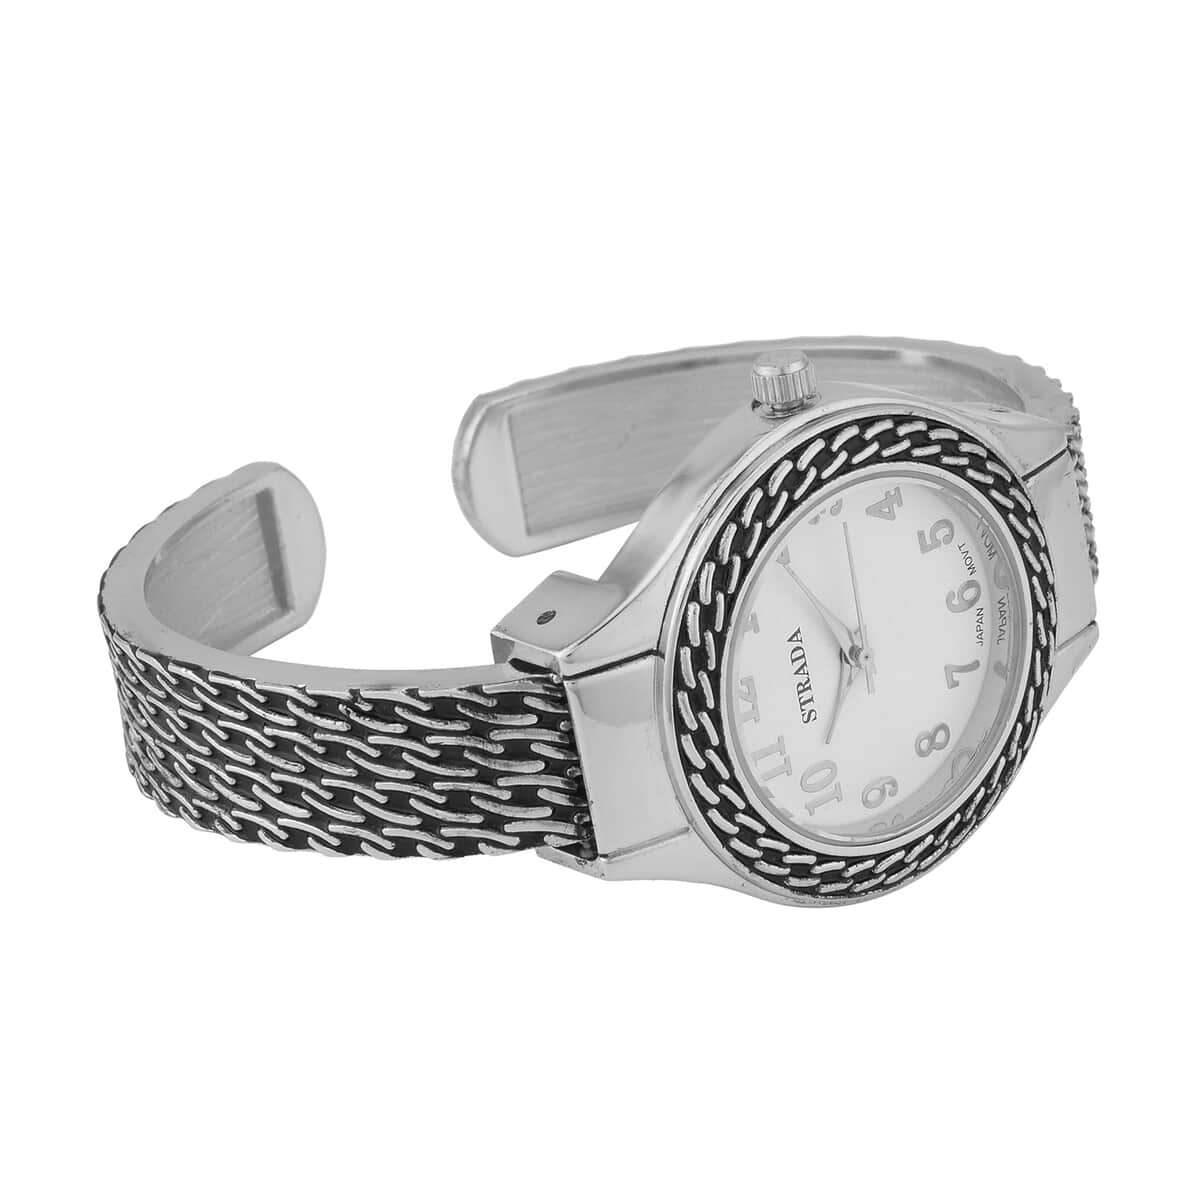 Strada Japanese Movement Cuff Watch in Black Oxidized Silvertone with Stainless Steel Back (26.67-33.27mm) image number 4